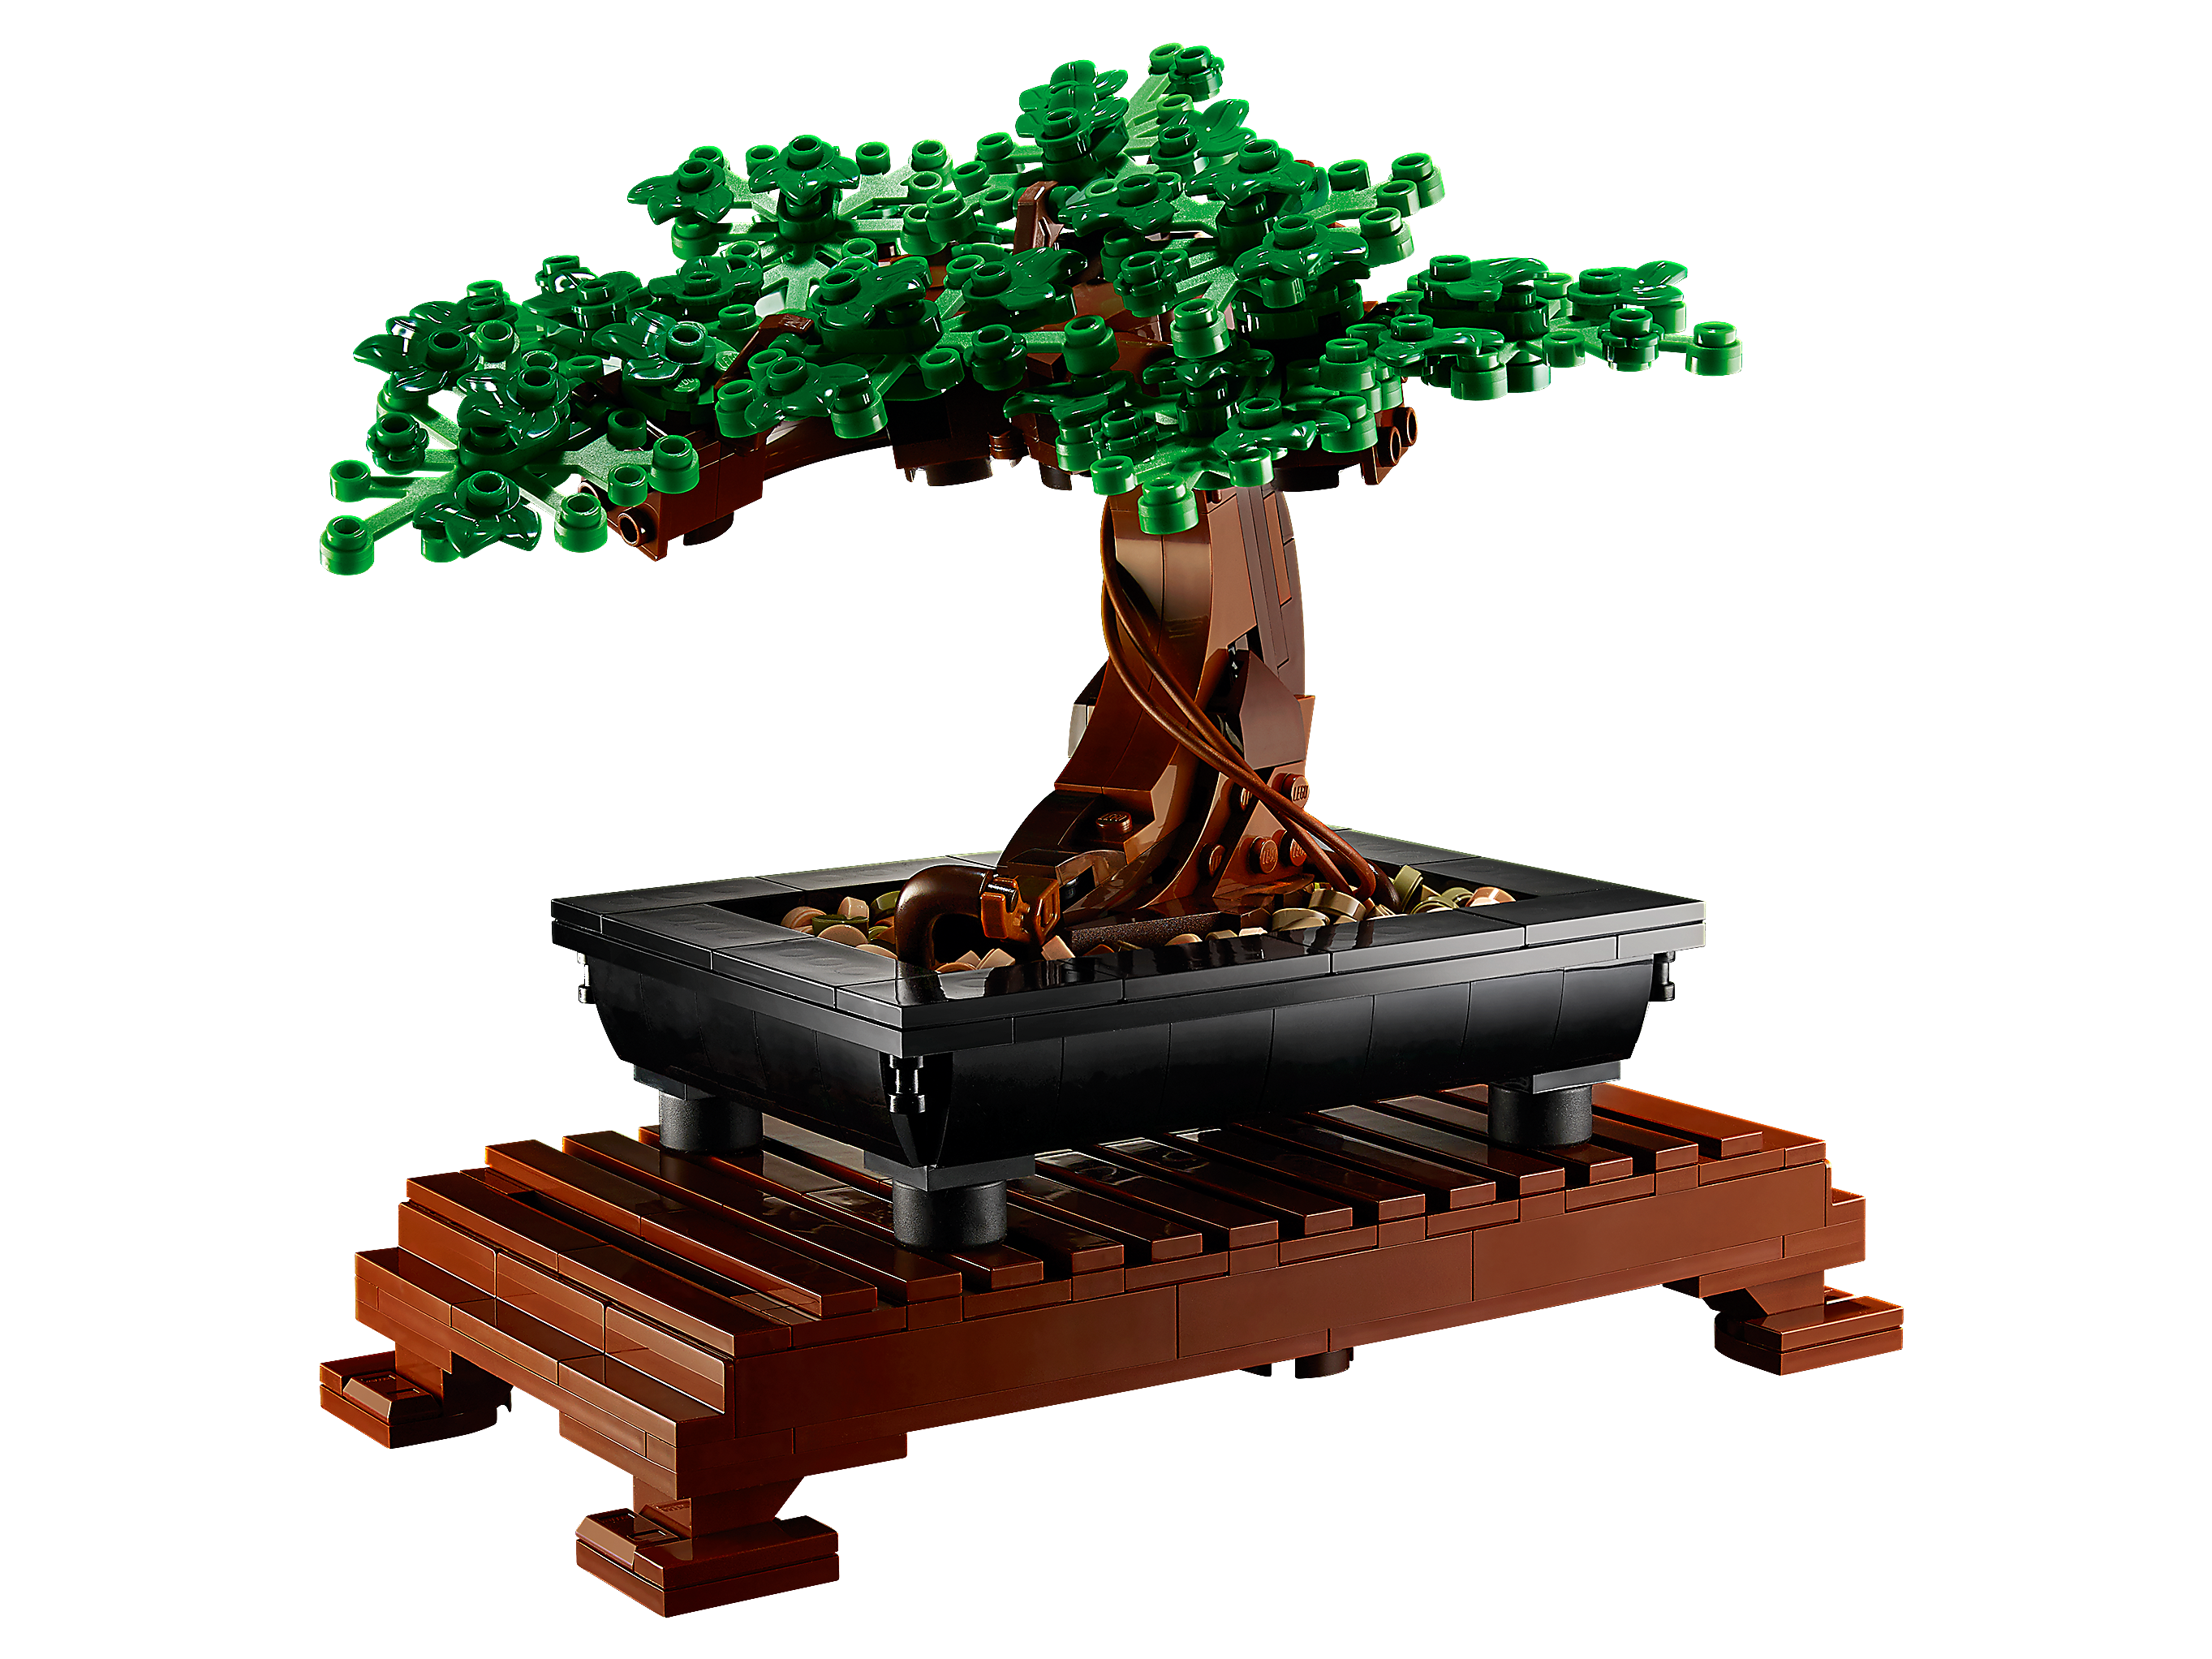 878 Pieces LEGO Bonsai Tree 10281 Building Kit a Building Project to Focus The Mind with a Beautiful Display Piece to Enjoy New 2021 